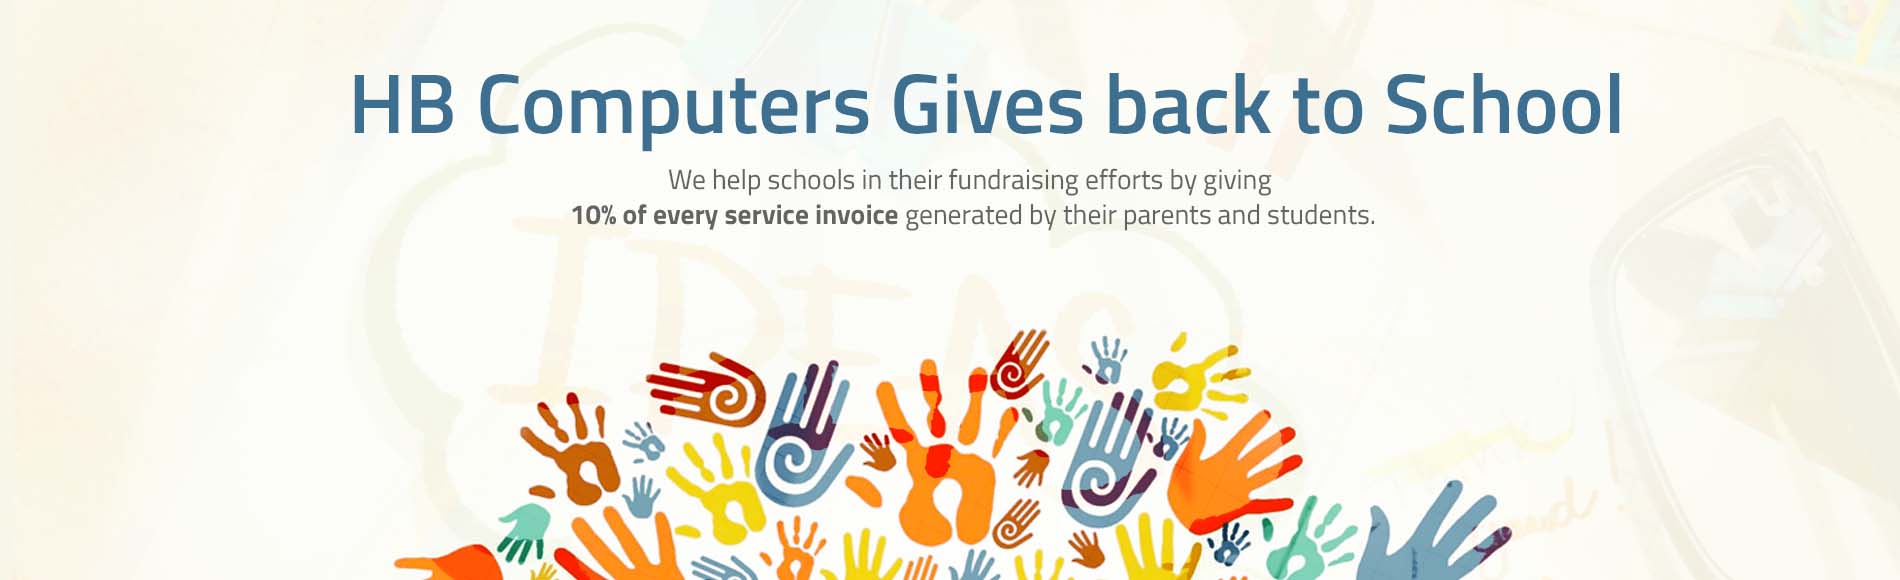 HB Computers Gives Back to Schools